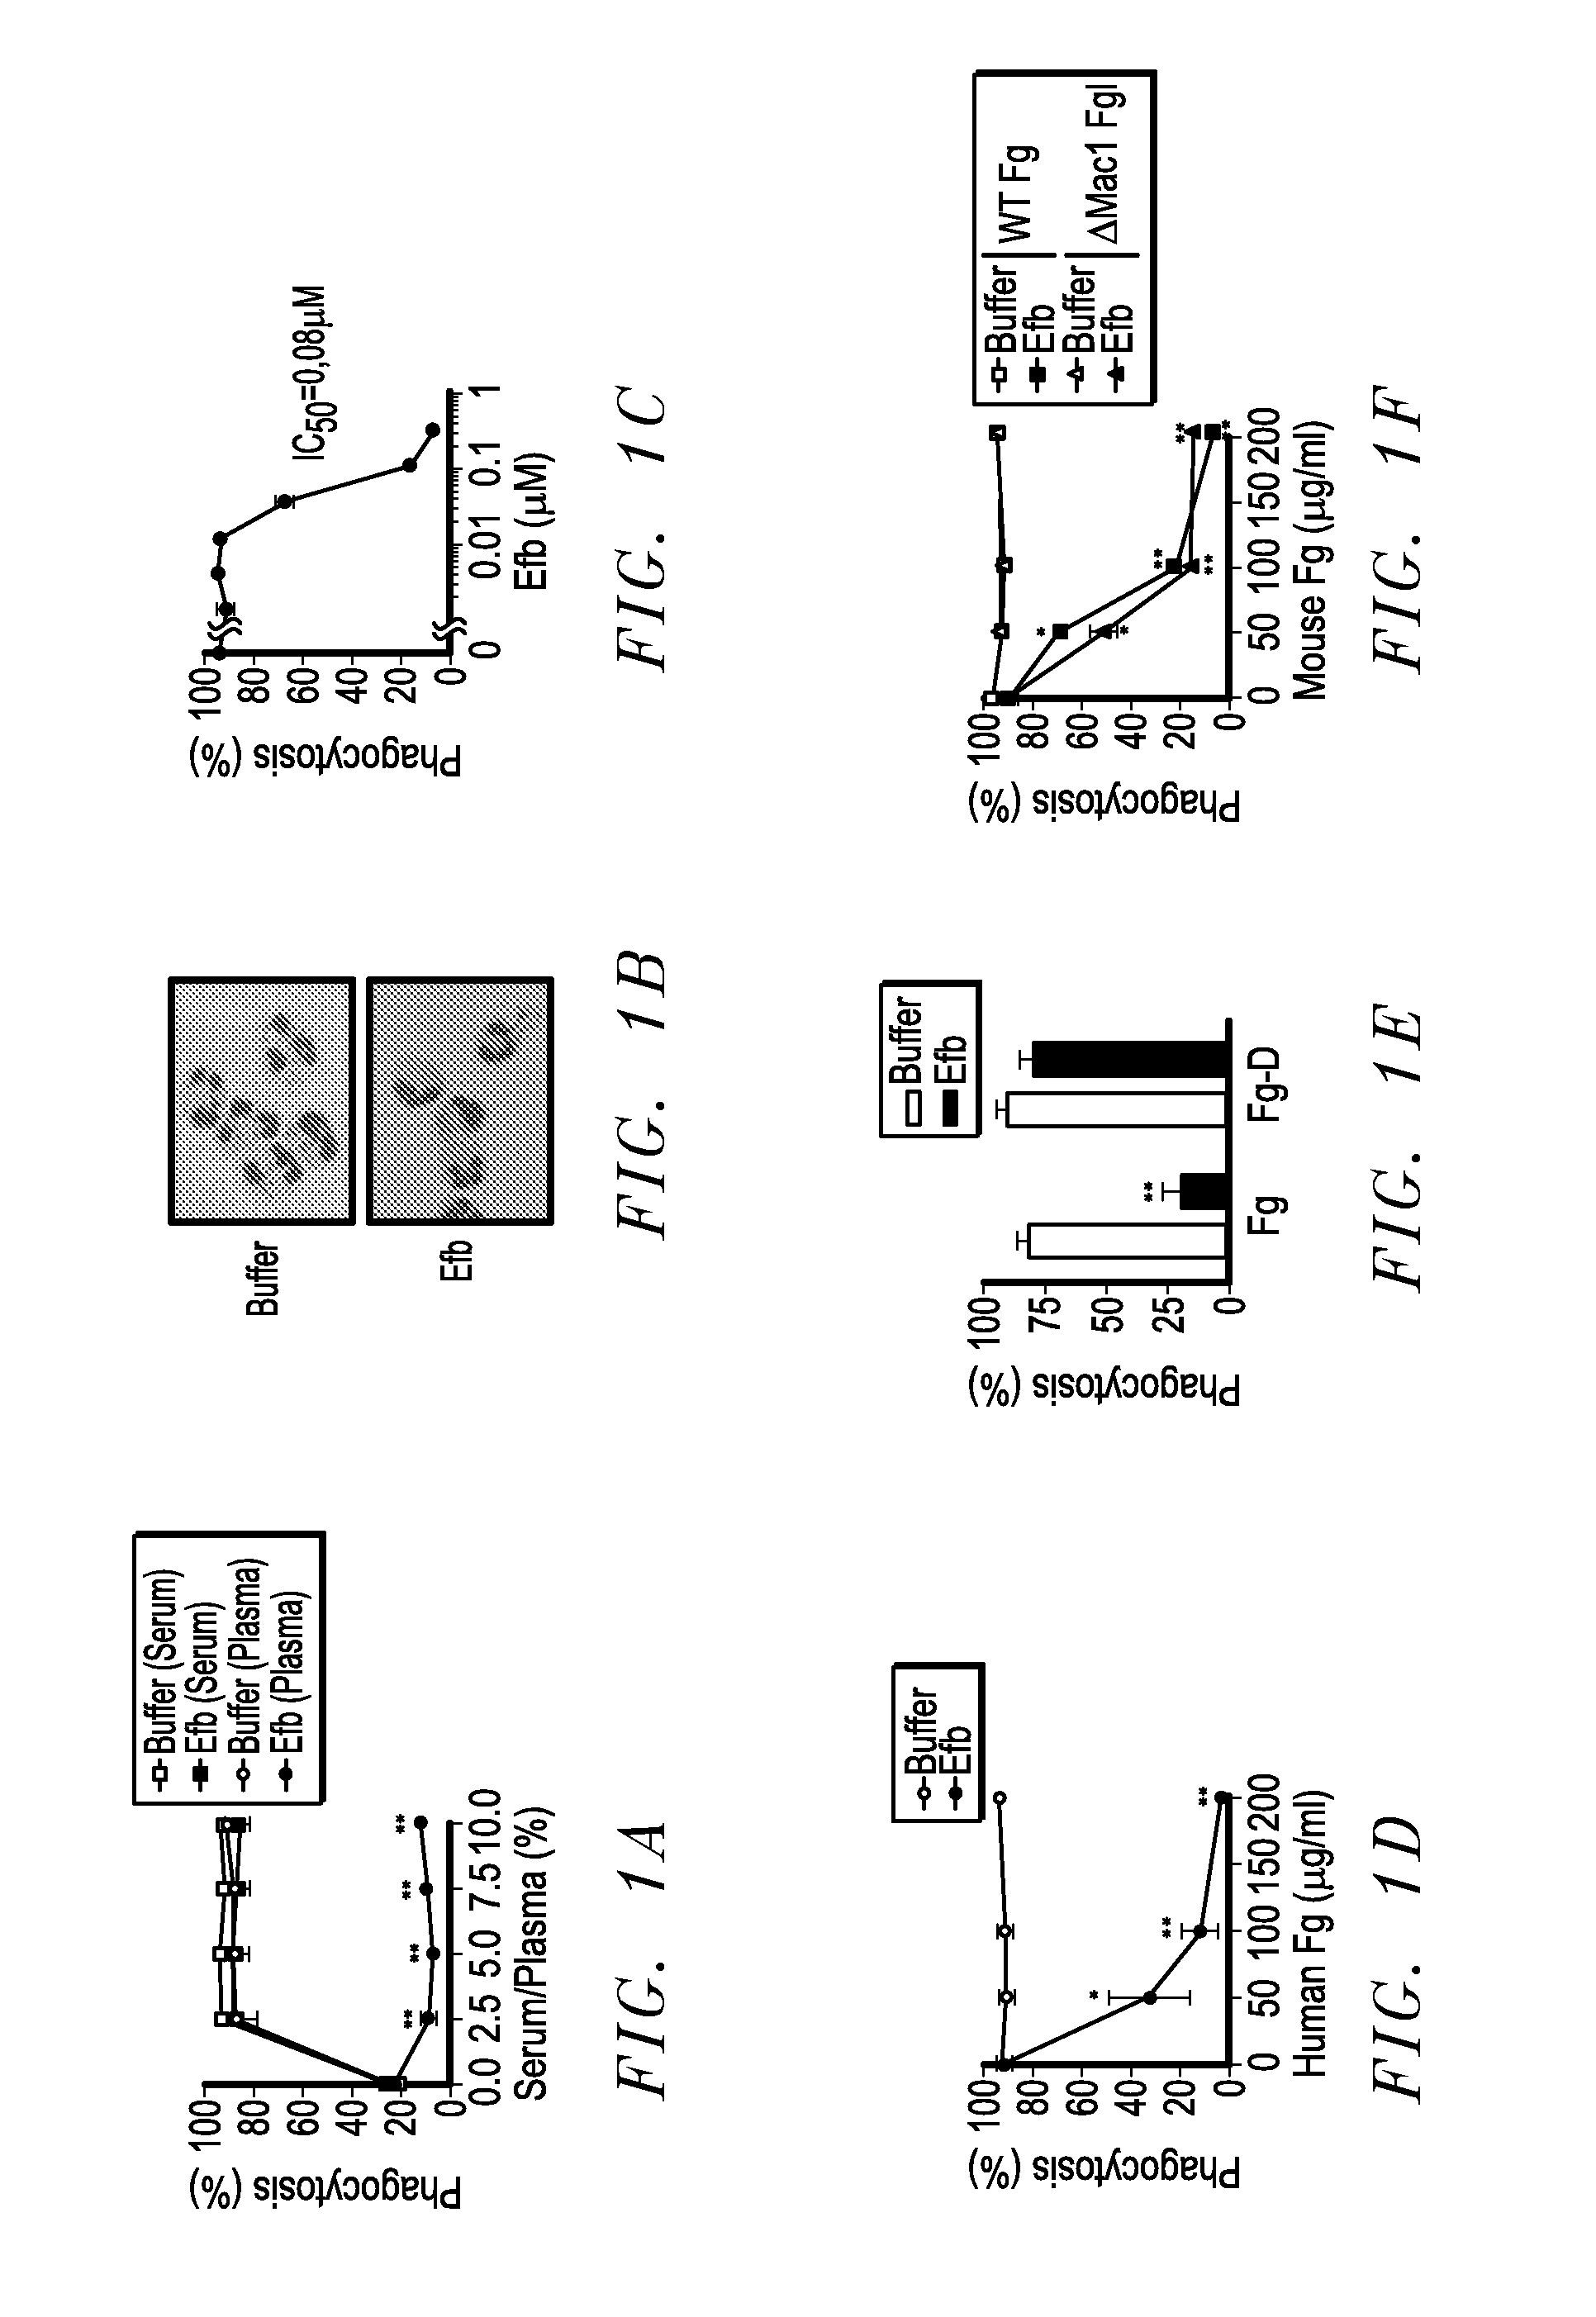 Compositions and the Use of Fibrinogen Binding Motif Presence in EFB and COA for Vaccine Against Staphylococcus Aureus and Drug Delivery